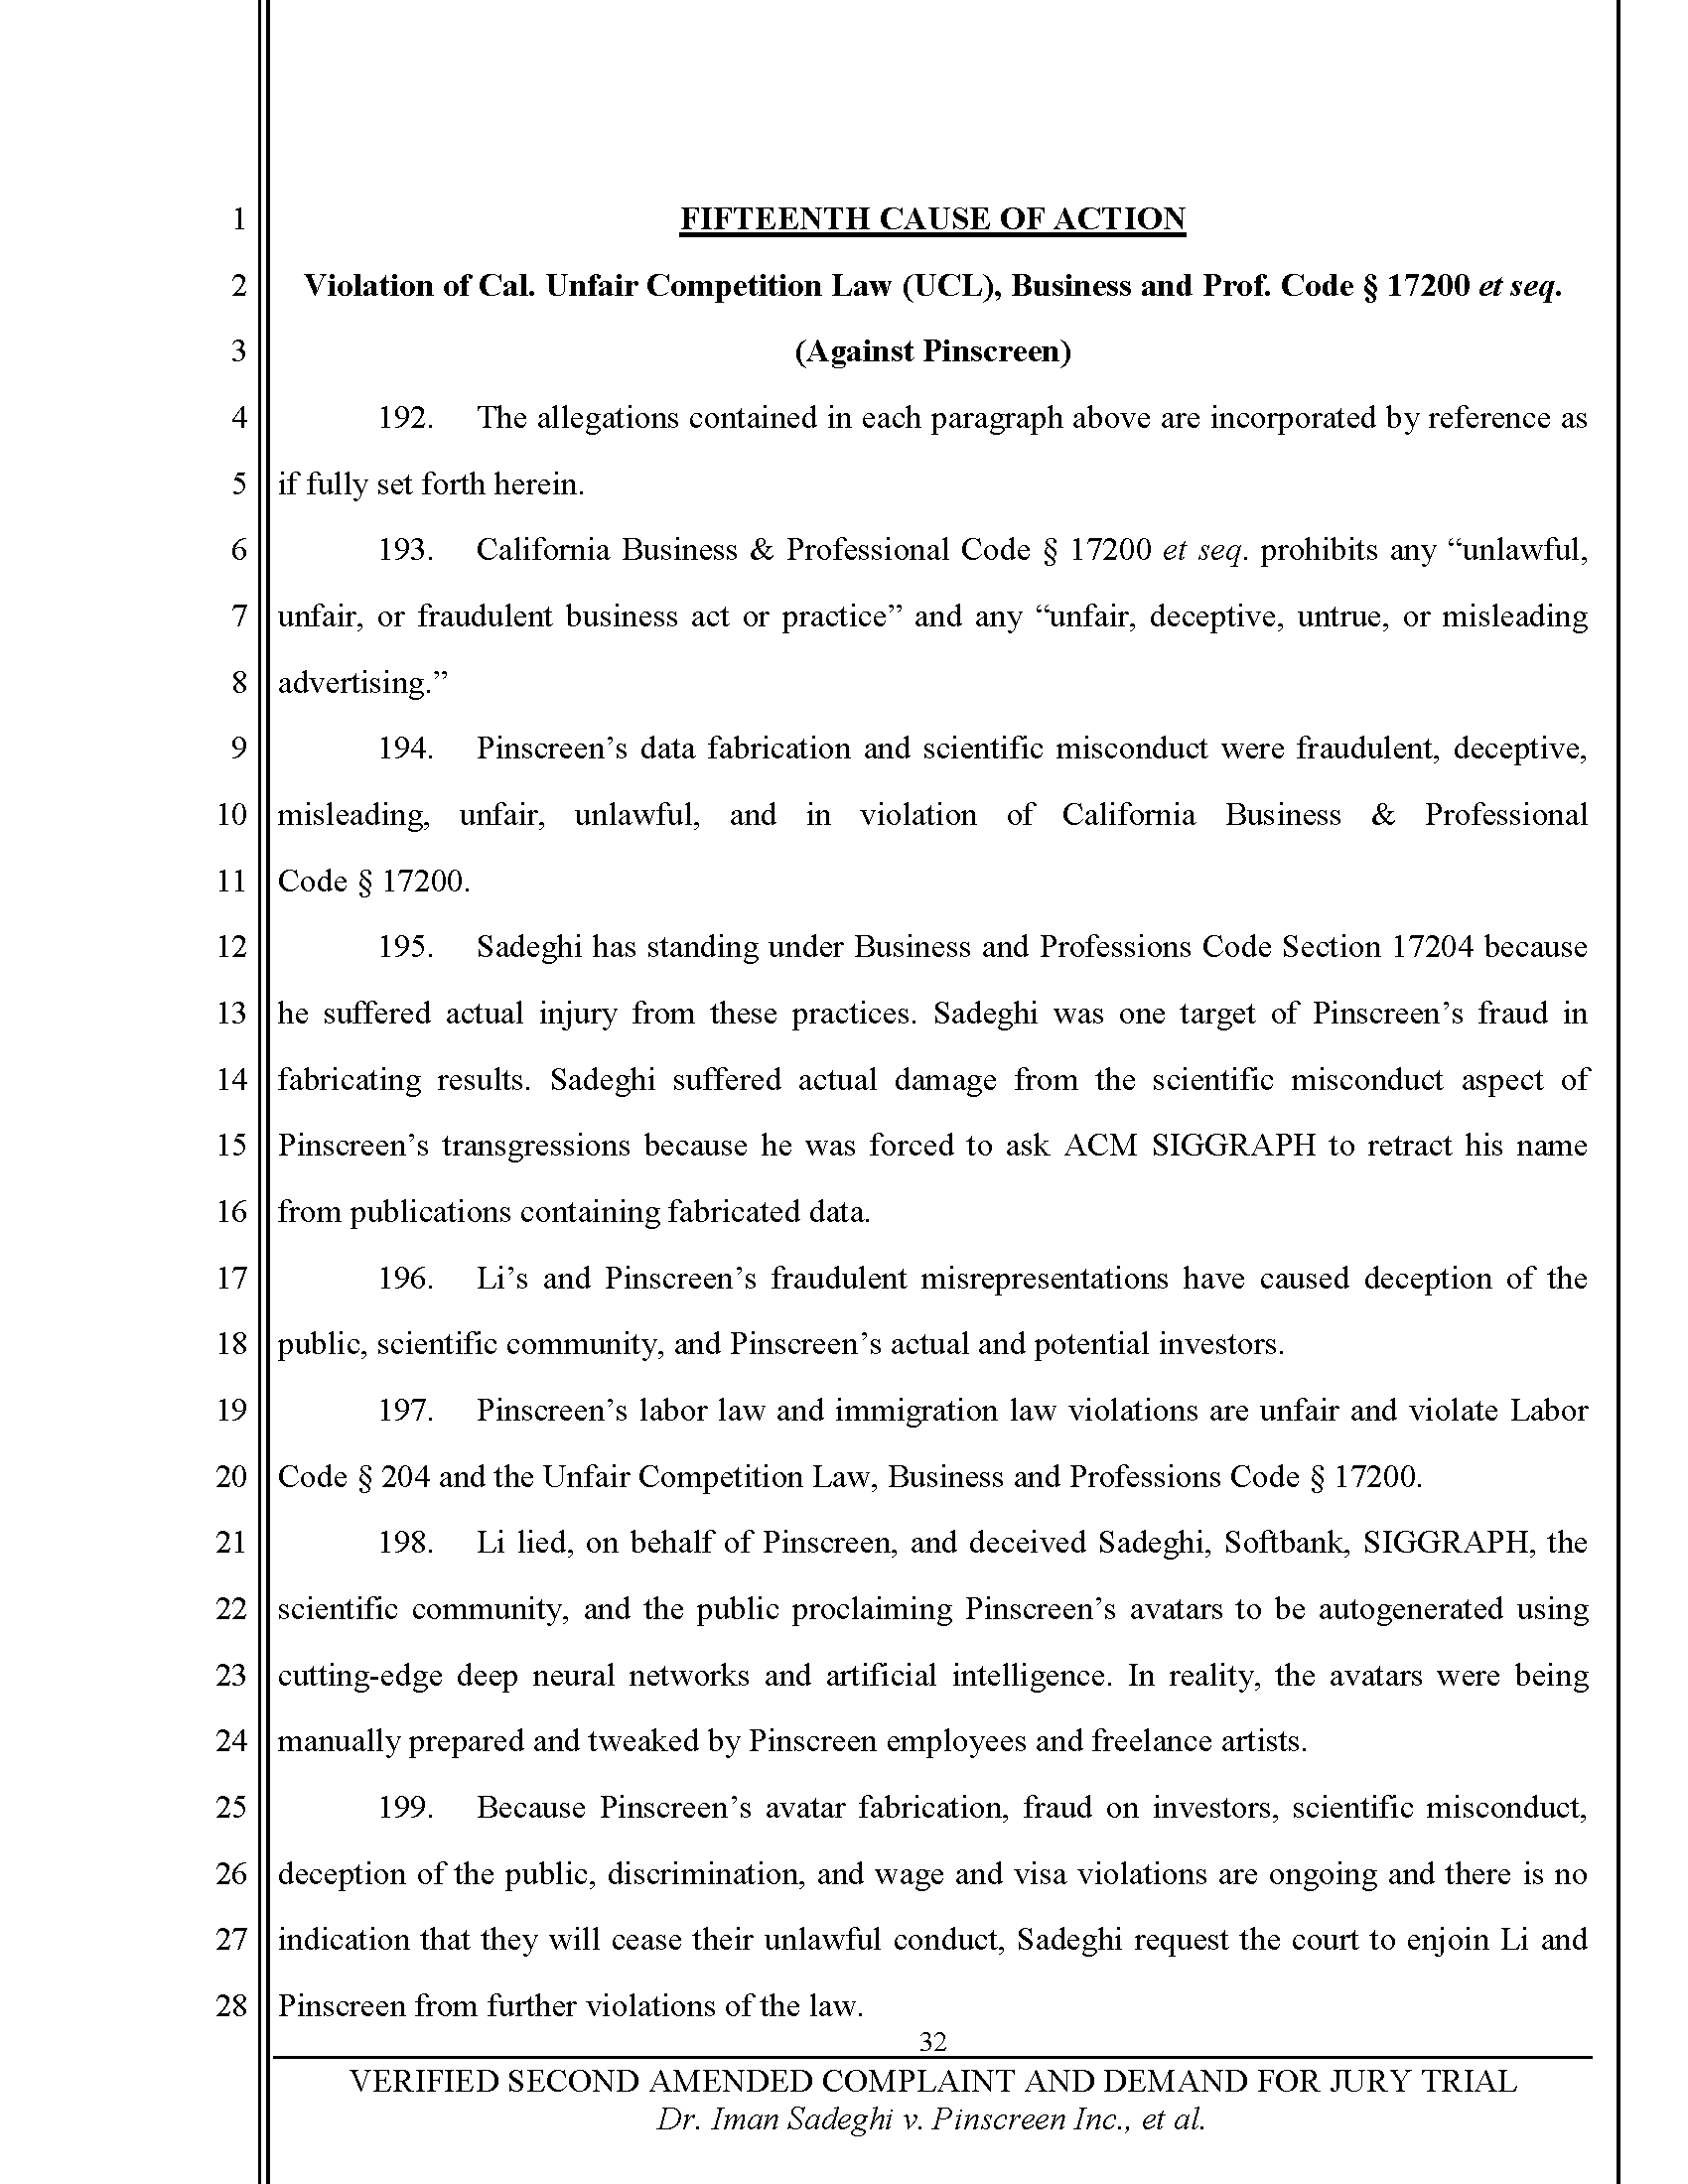 Second Amended Complaint (SAC) Page 33